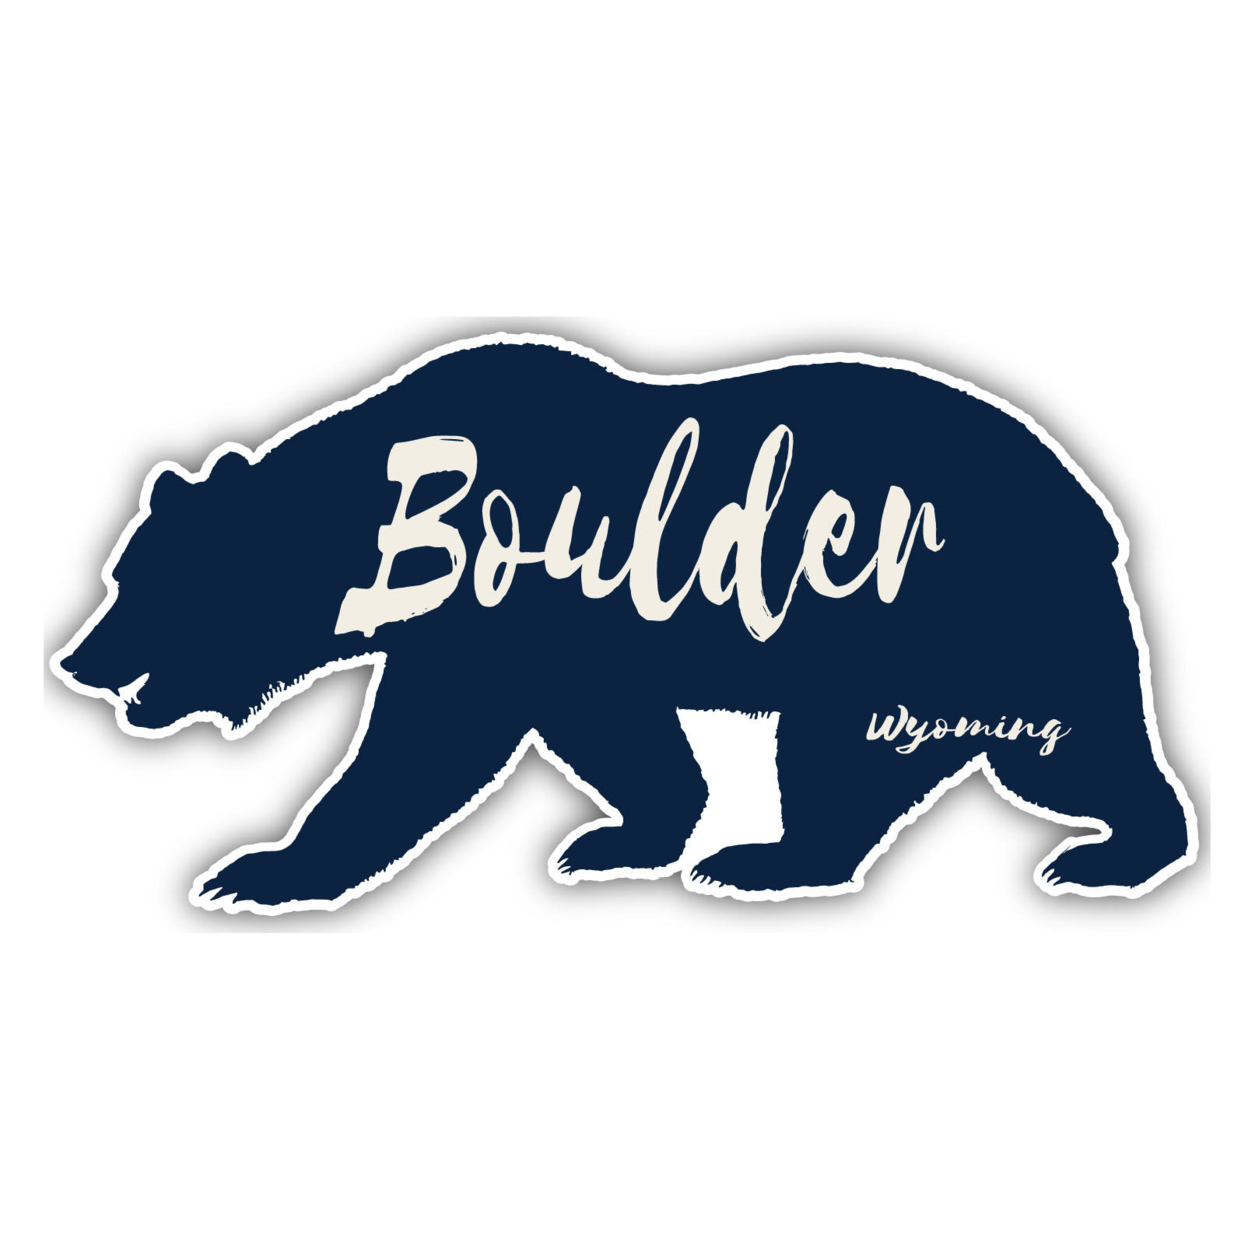 Boulder Wyoming Souvenir Decorative Stickers (Choose Theme And Size) - 4-Pack, 12-Inch, Bear